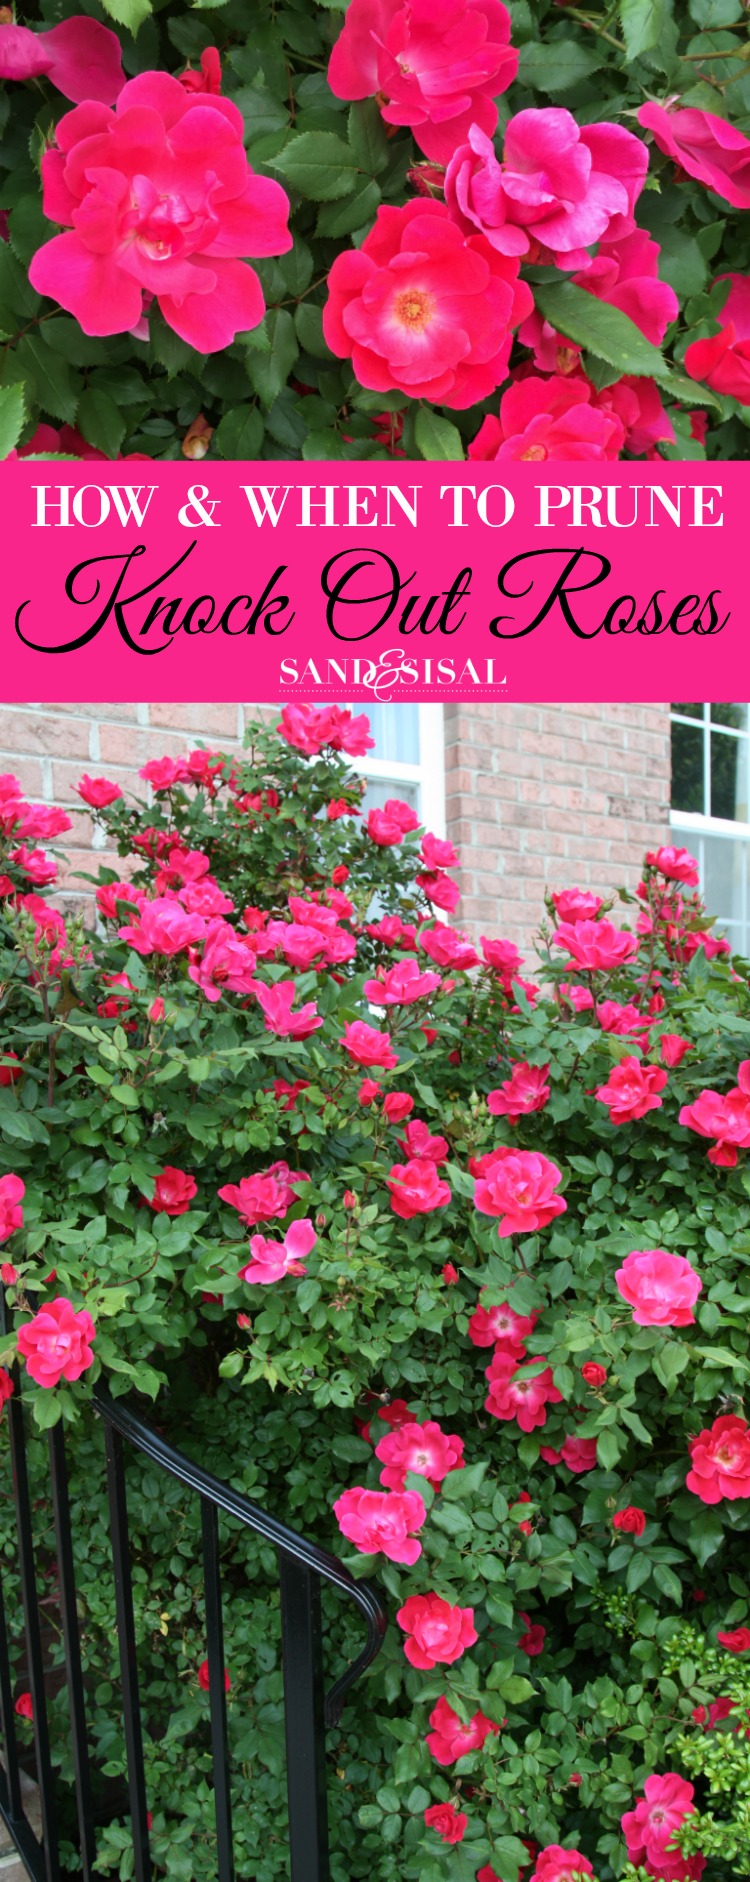 How and When to Prune Knock Out Roses